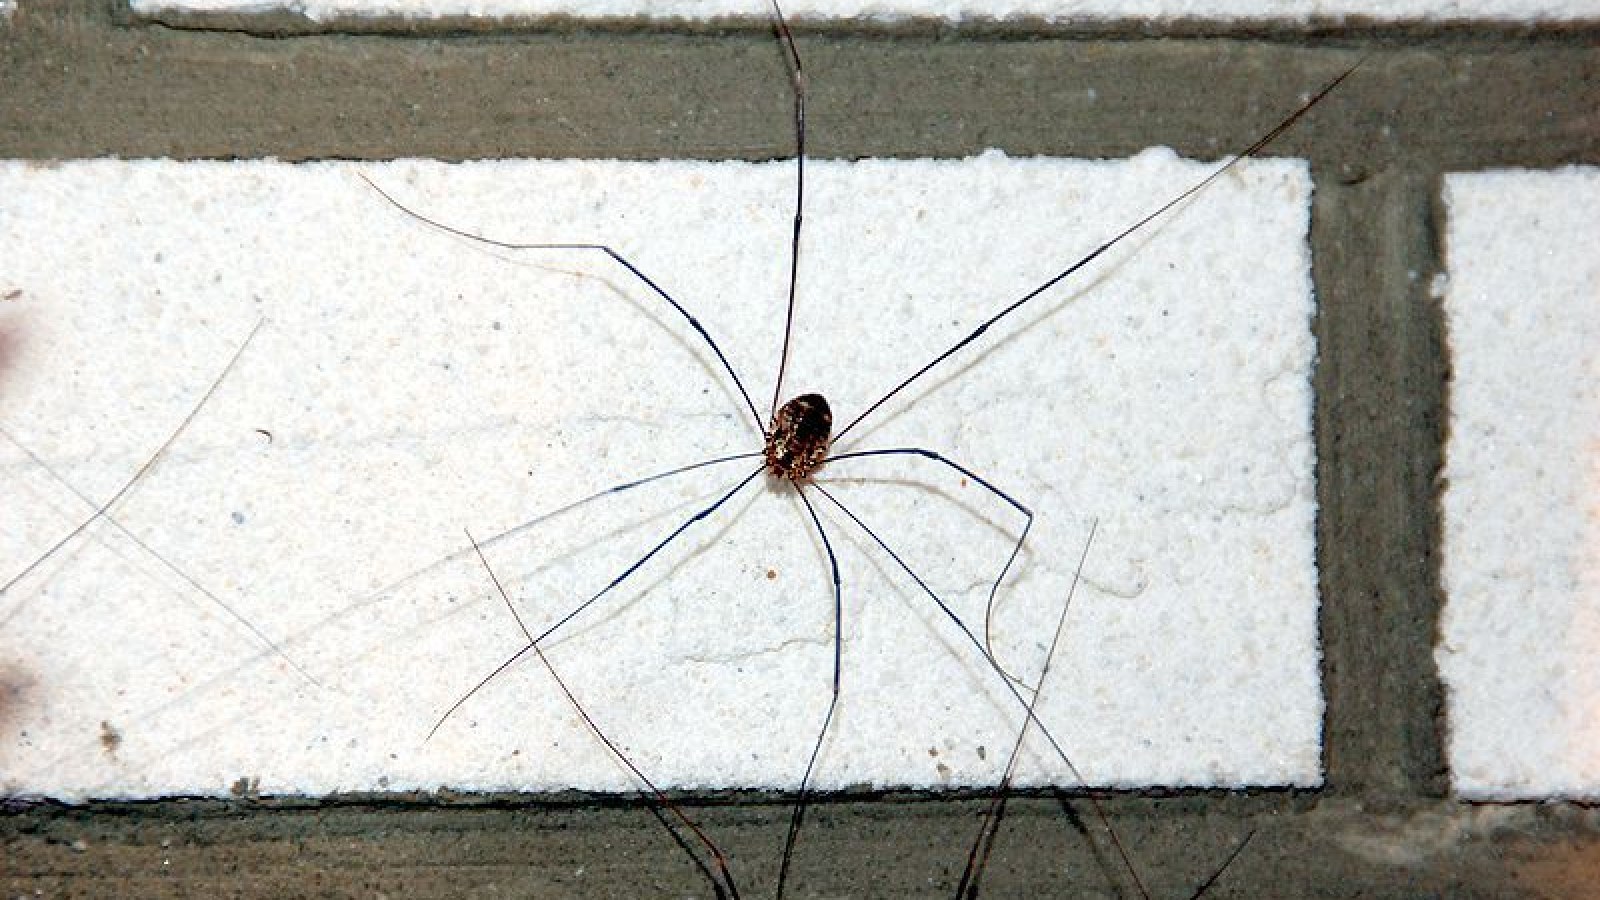 daddy long legs spider clump